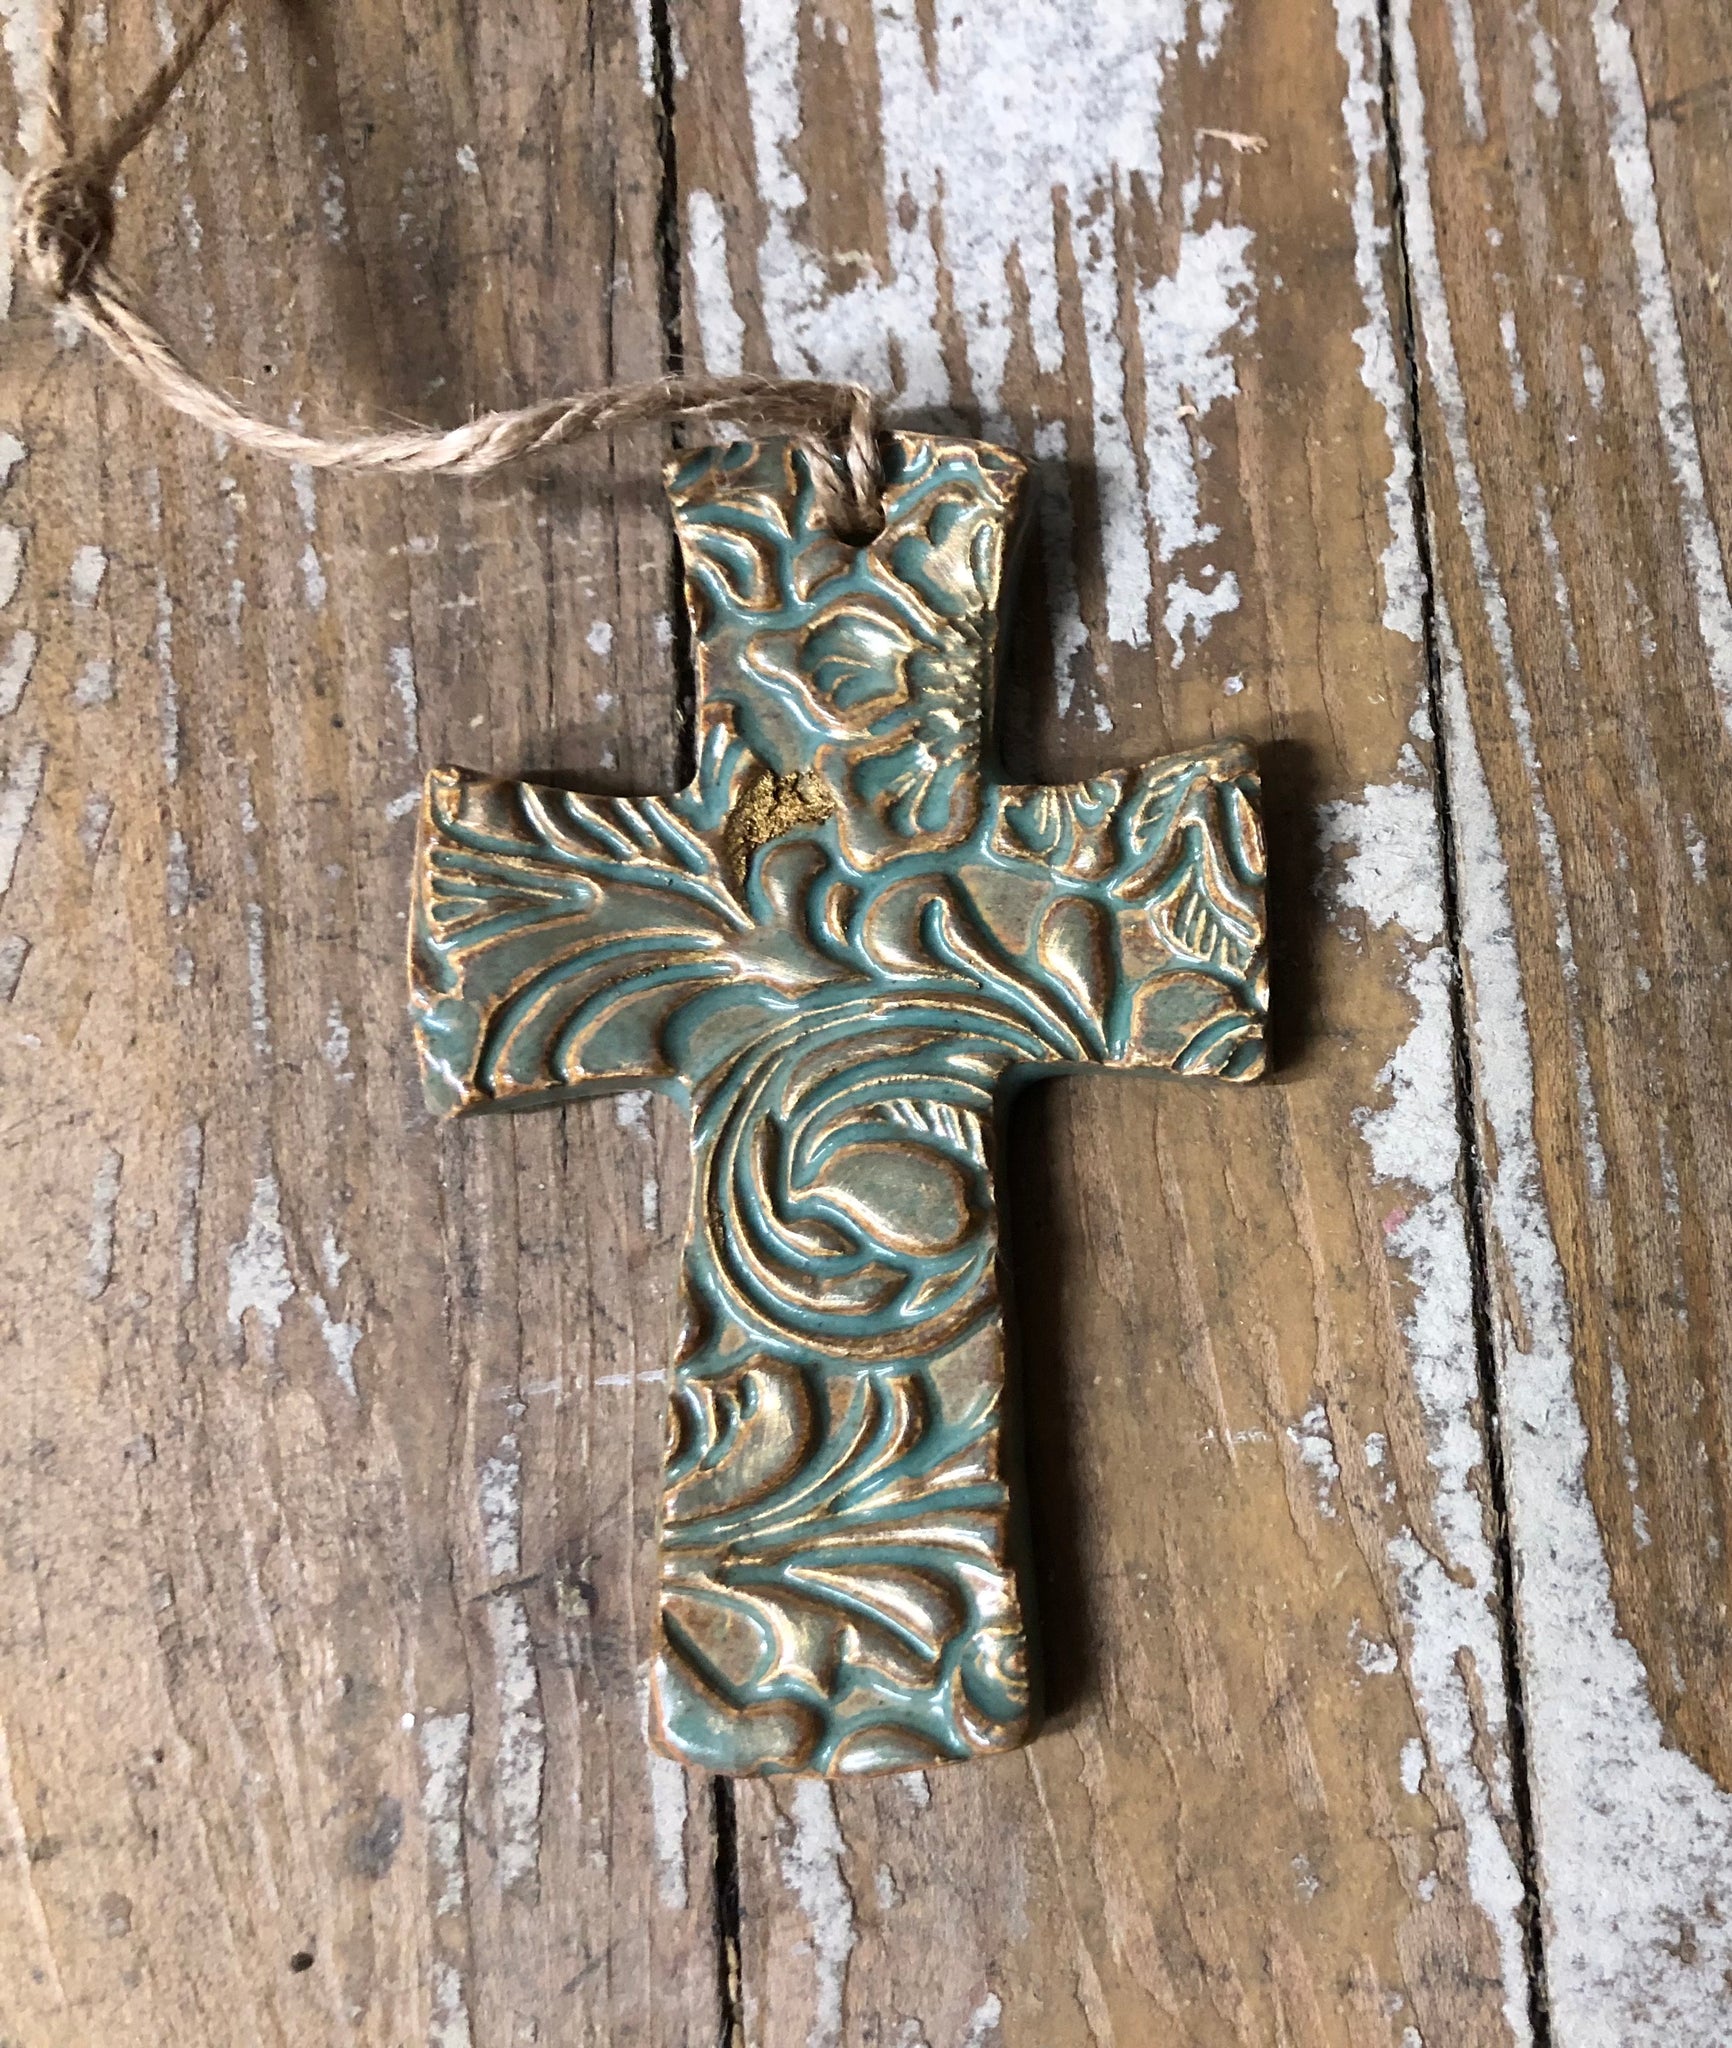 Wyoming Pottery Cross Ornaments